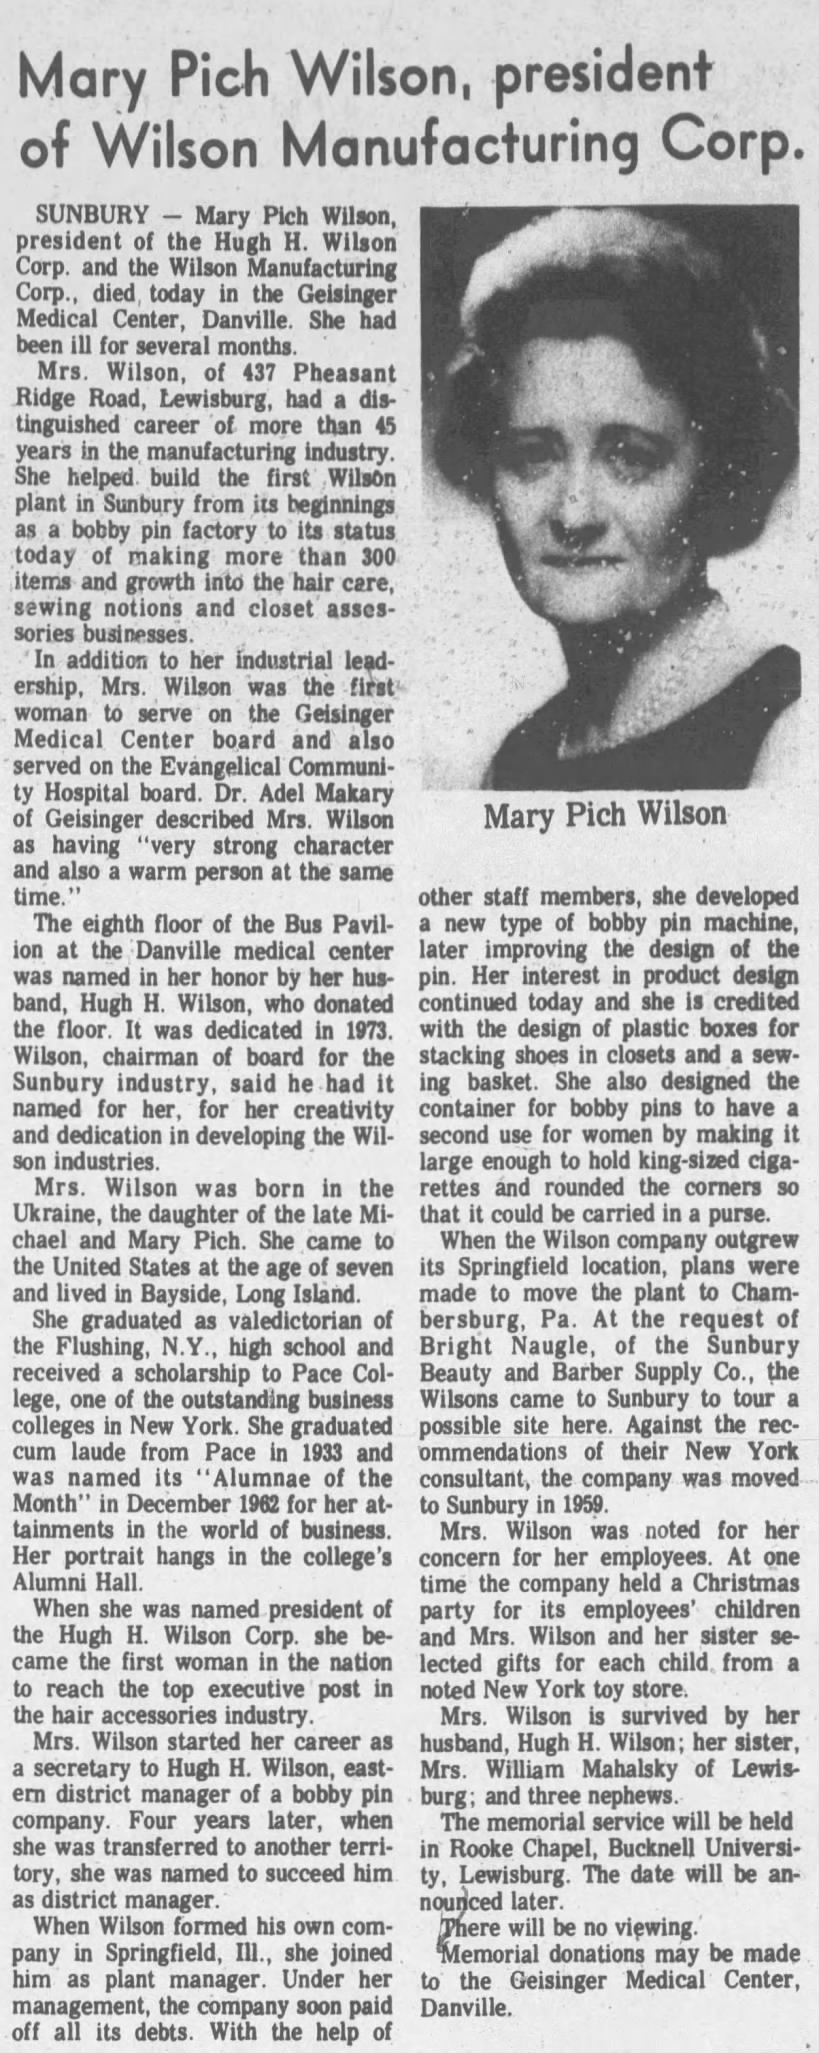 Obituary for Mary Pich Wilson